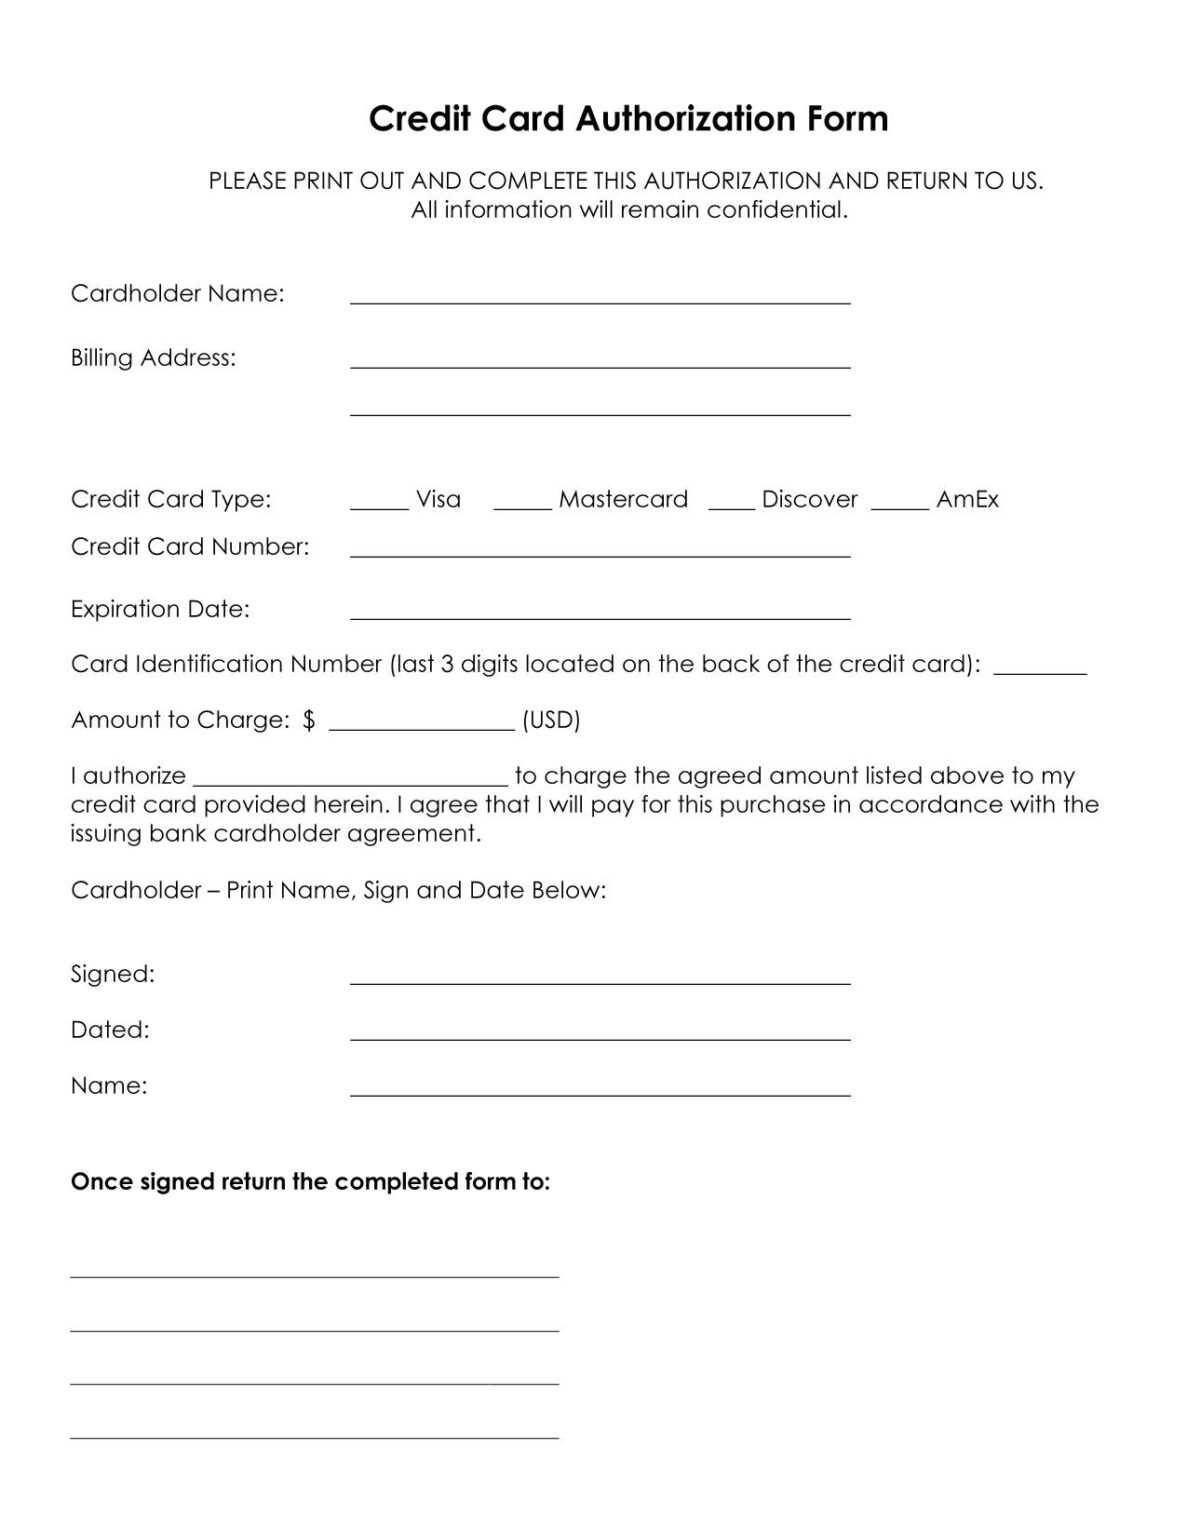 Credit Card Authorization Form Template Processing Example Throughout